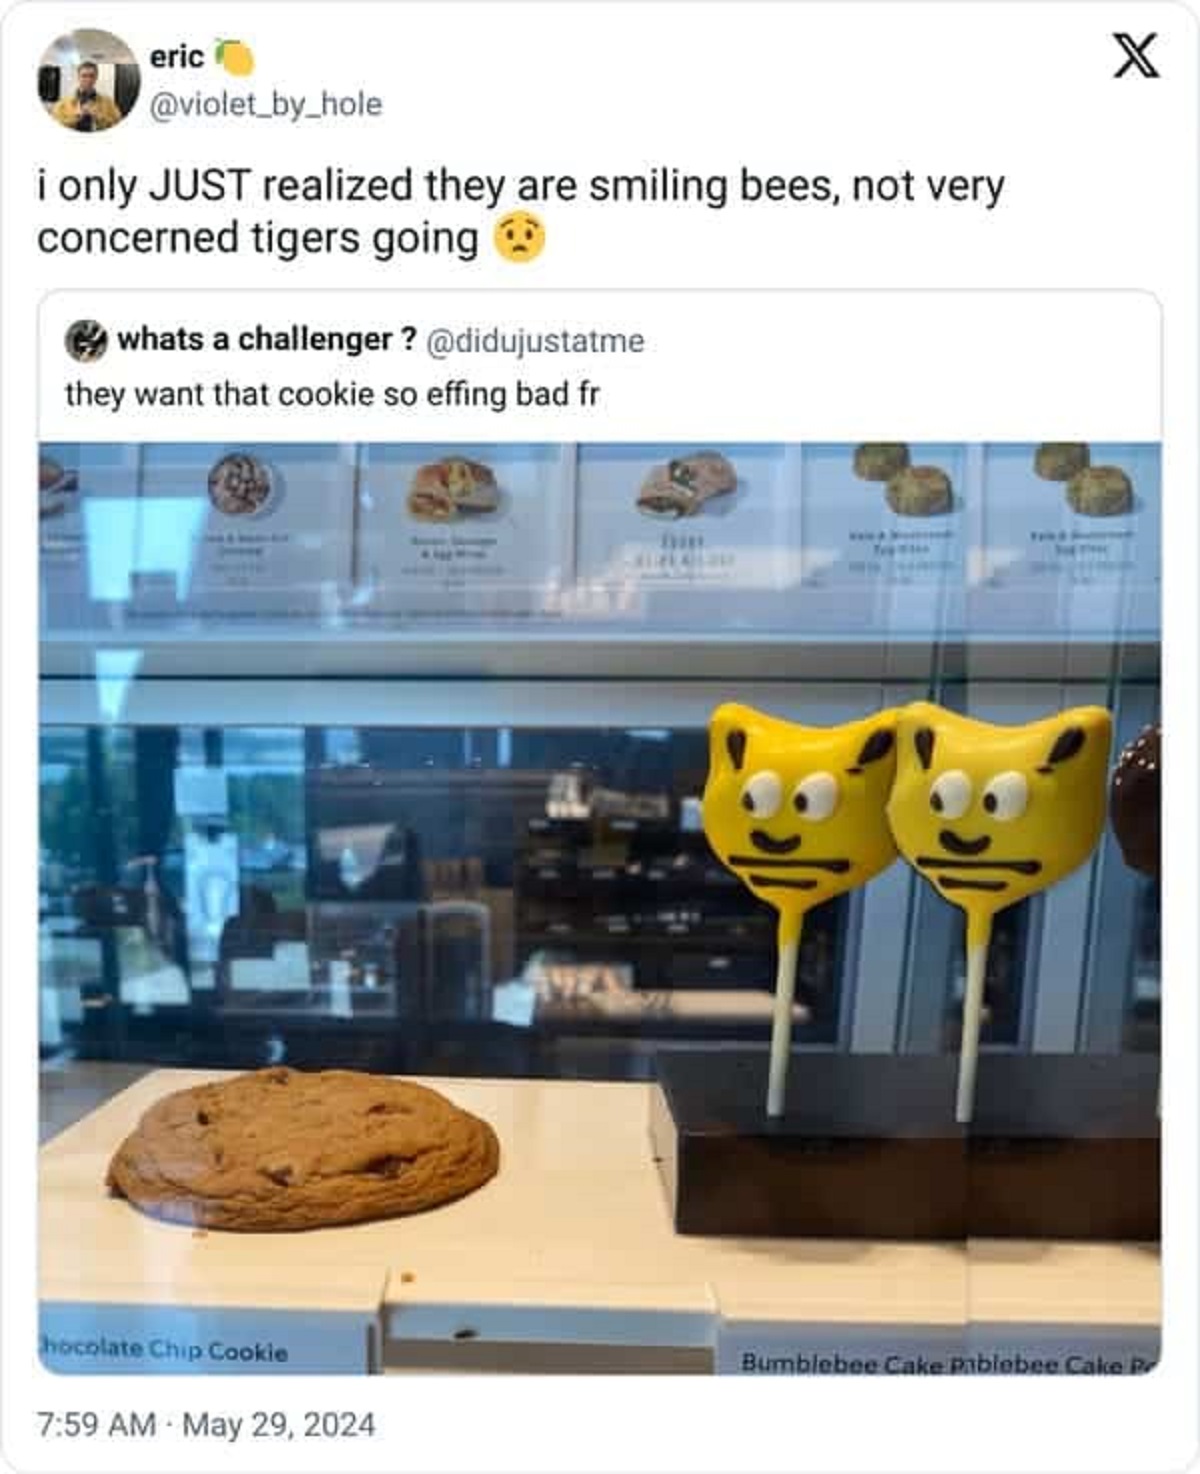 he wants that effing cookie - eric i only Just realized they are smiling bees, not very concerned tigers going whats a challenger? they want that cookie so effing bad fr X hocolate Chip Cookie Bumblebee Cake Pablebee Cake P